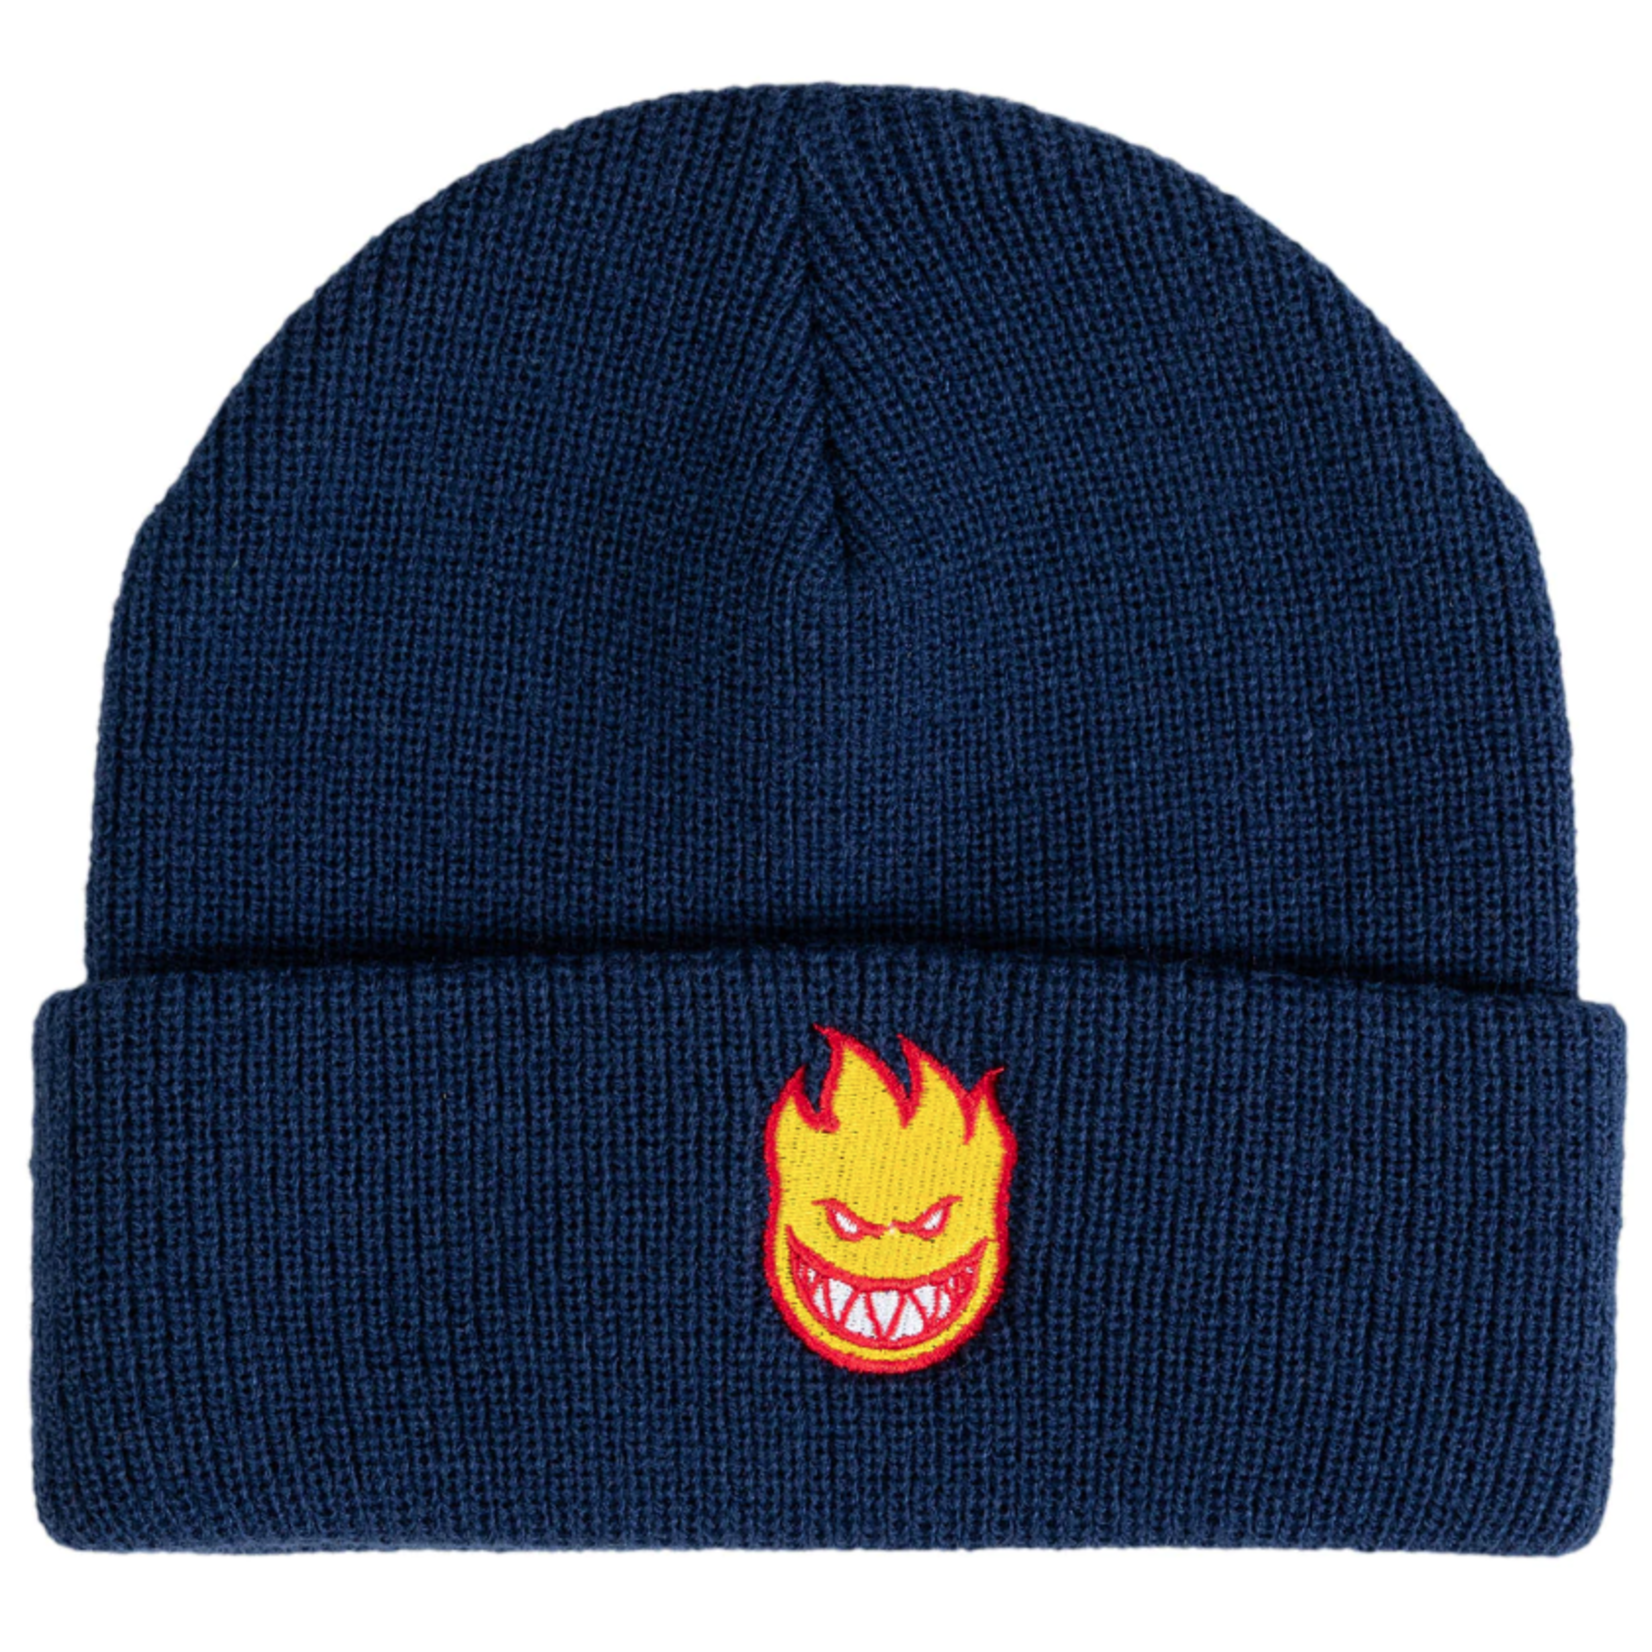 Krooked Spitfire Bighead Fill Toque - Navy/Red/Gold